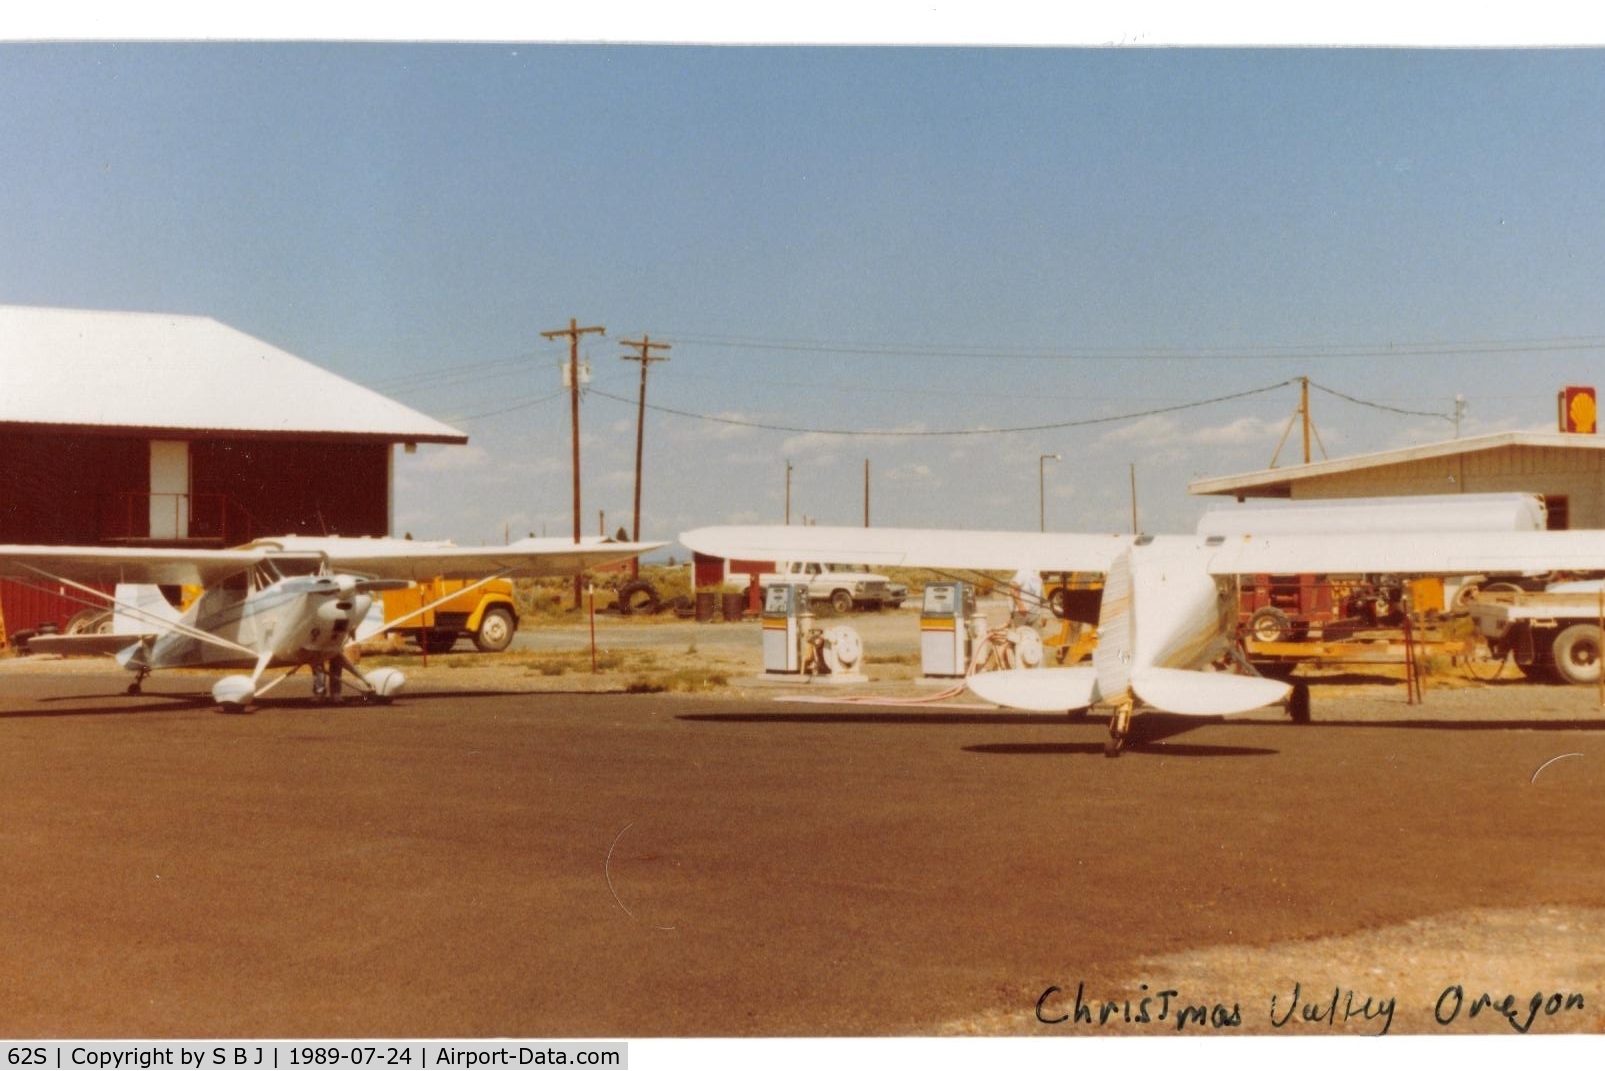 Christmas Valley Airport (62S) - A stop for gas in 1989.